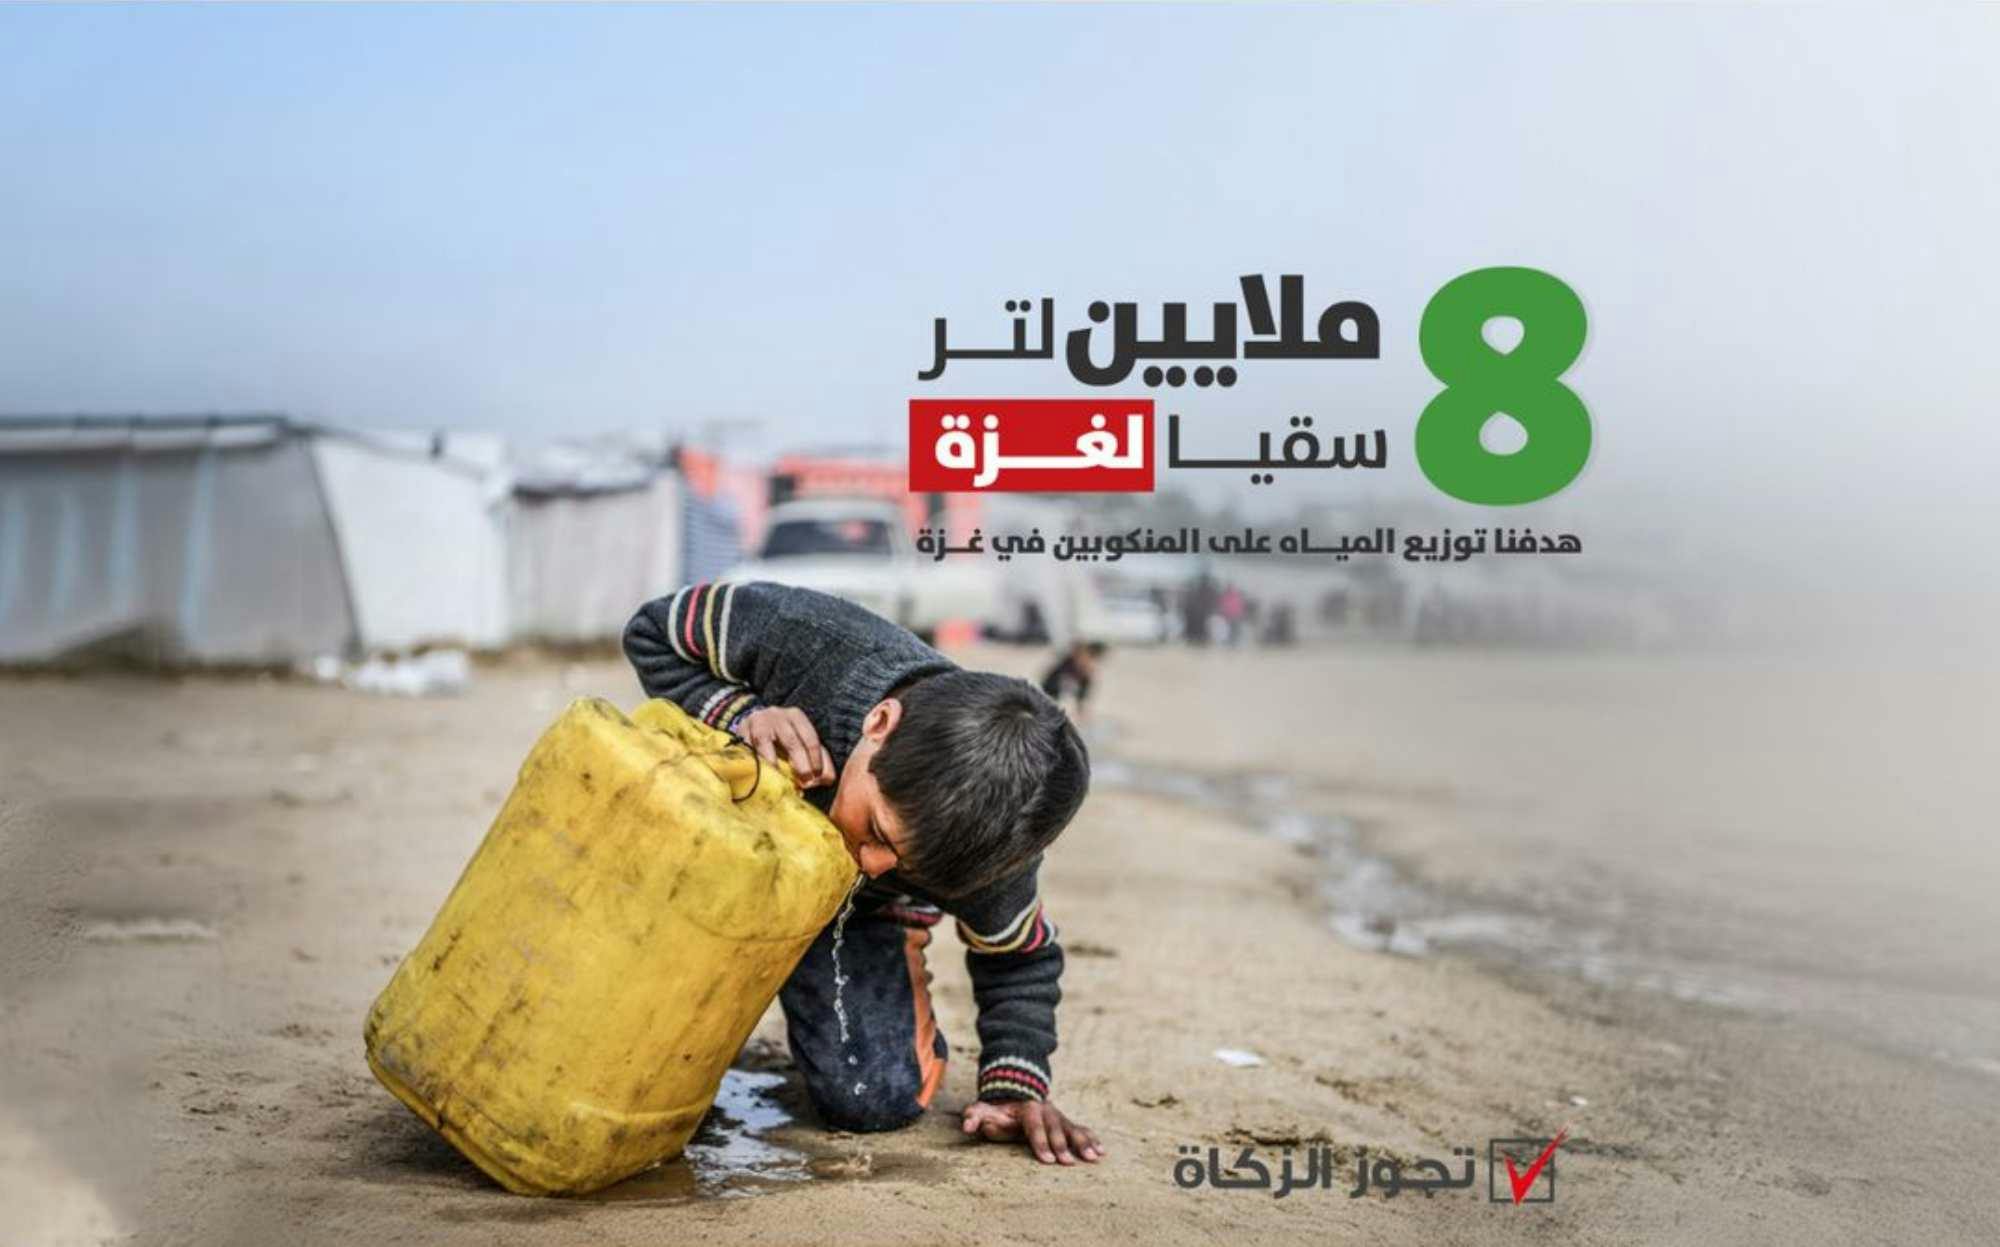 8 Million Liters Campaign "Water for Gaza" - Zakat is permissible - photo